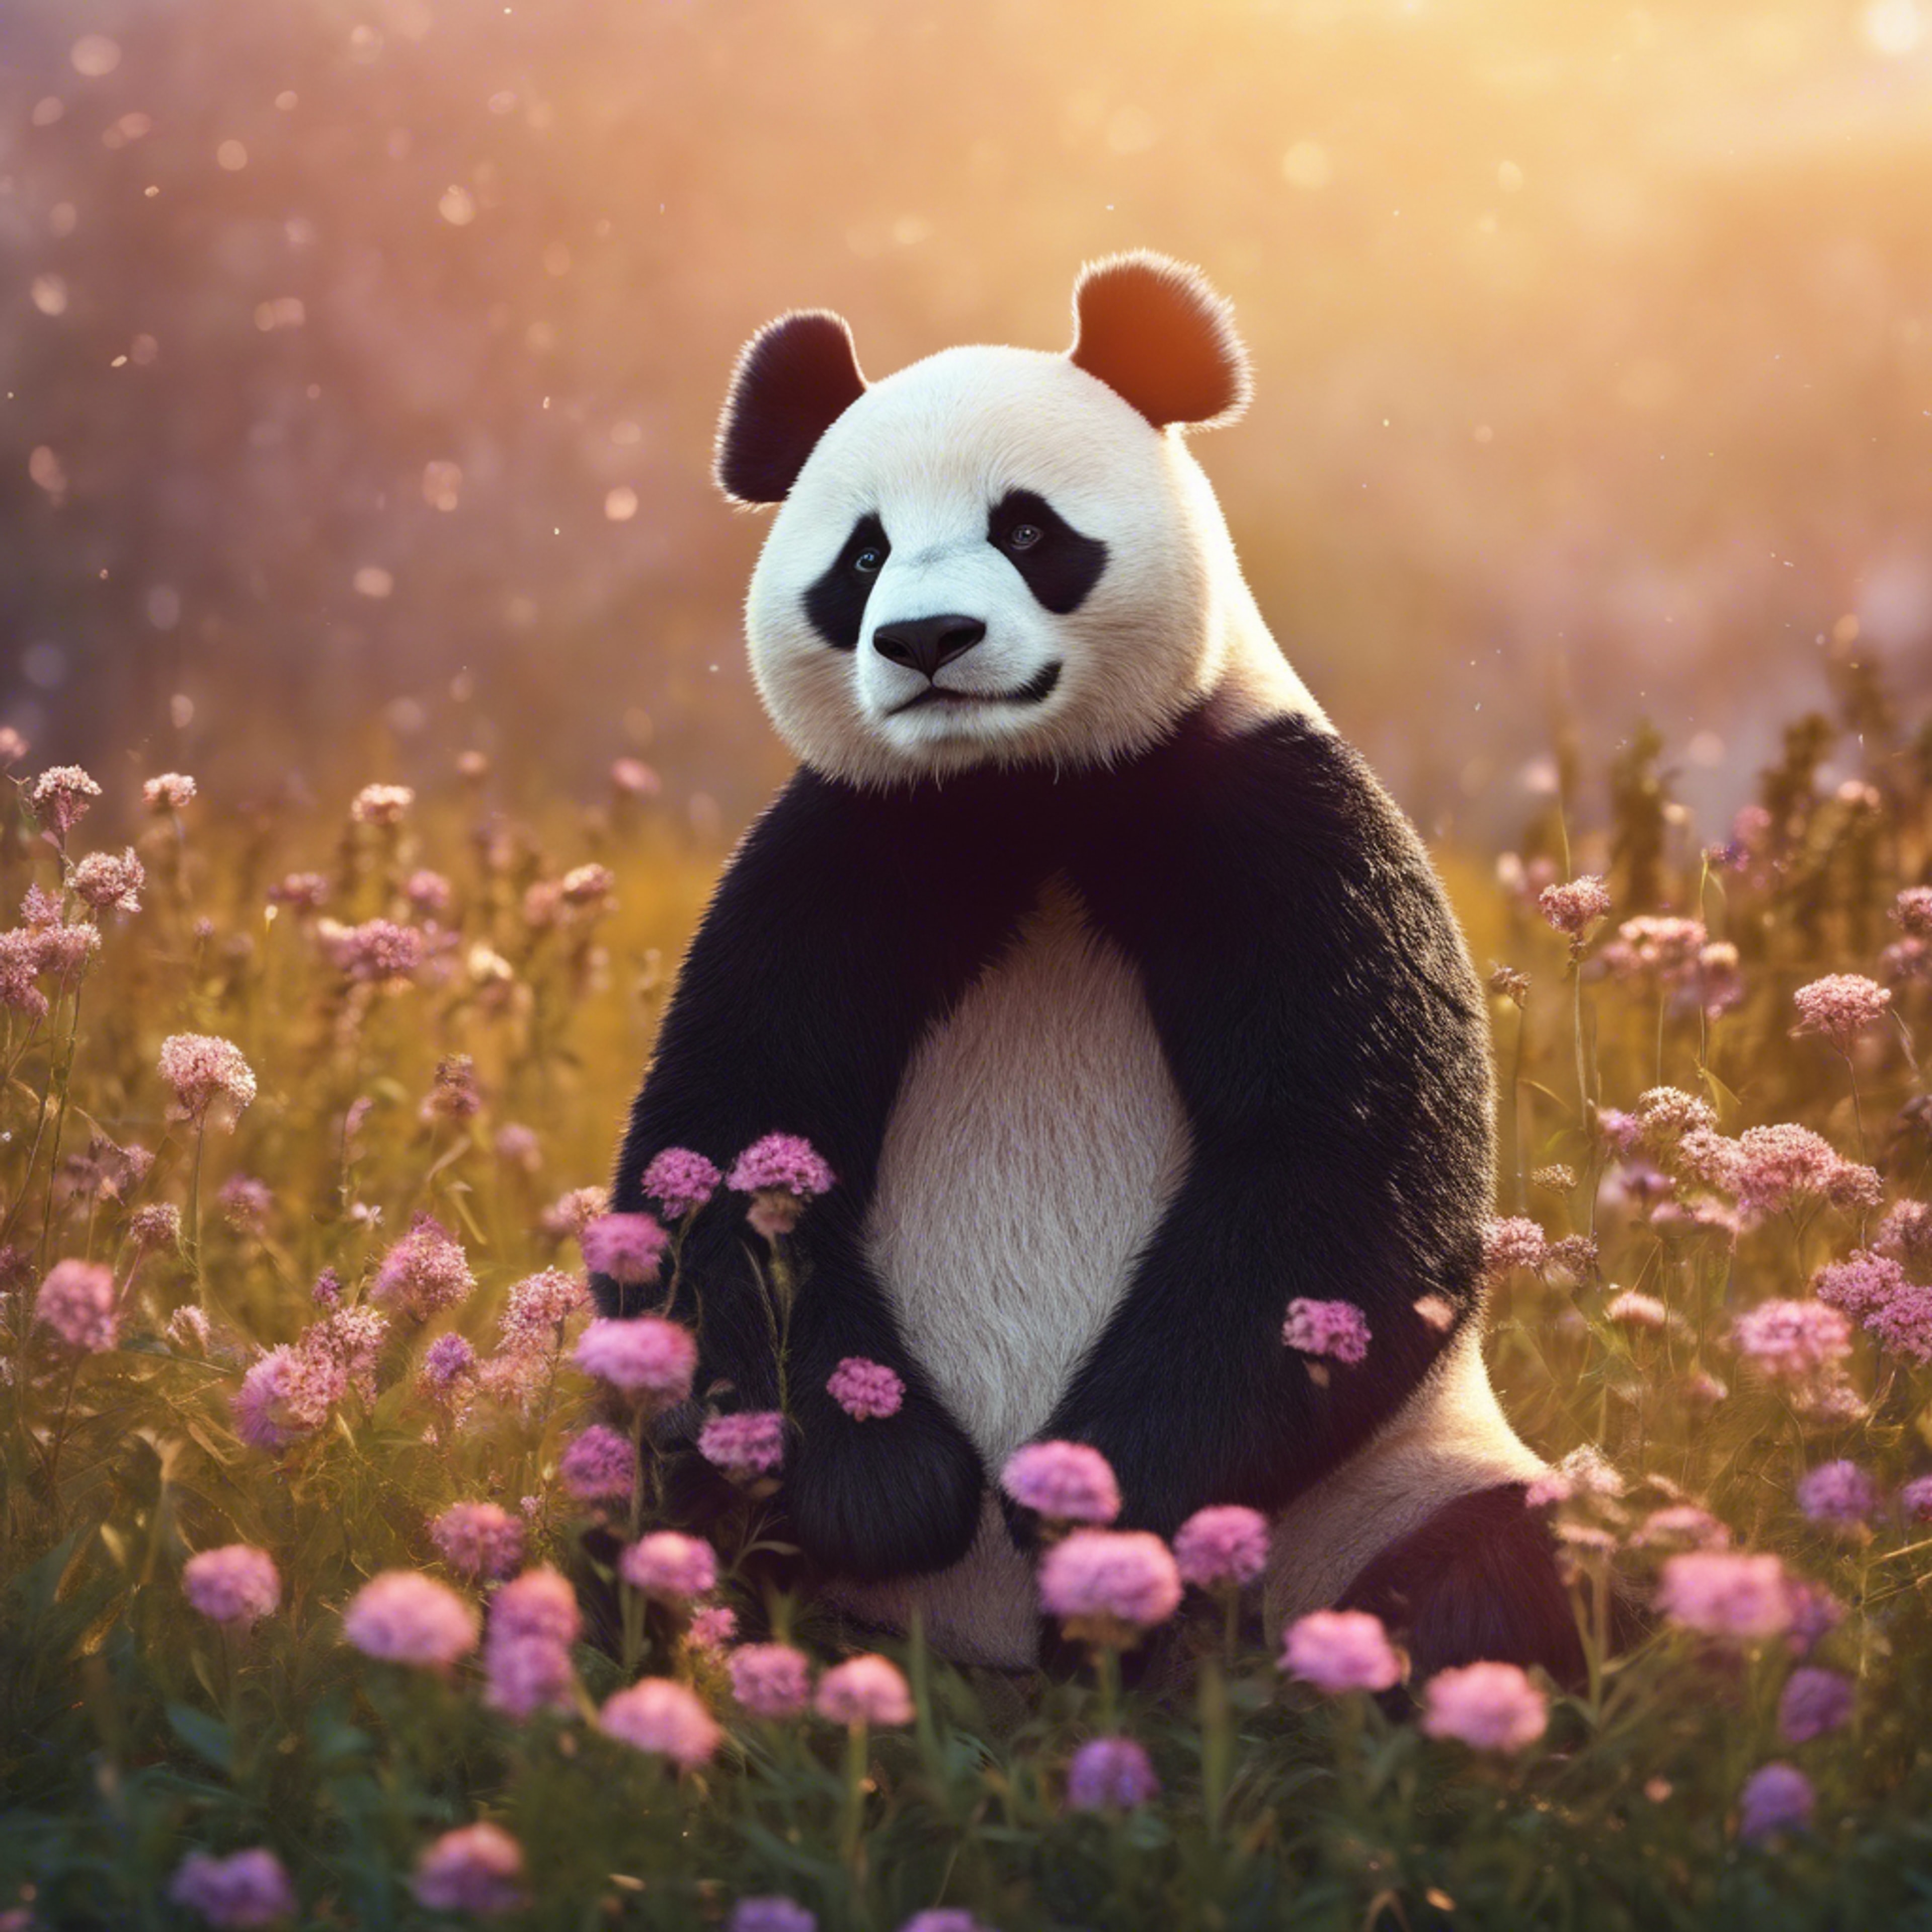 Beautiful illustration of a panda relaxing under the glow of the setting sun, surrounded by a field of wildflowers. Behang[4e88d1ee586942fa837d]